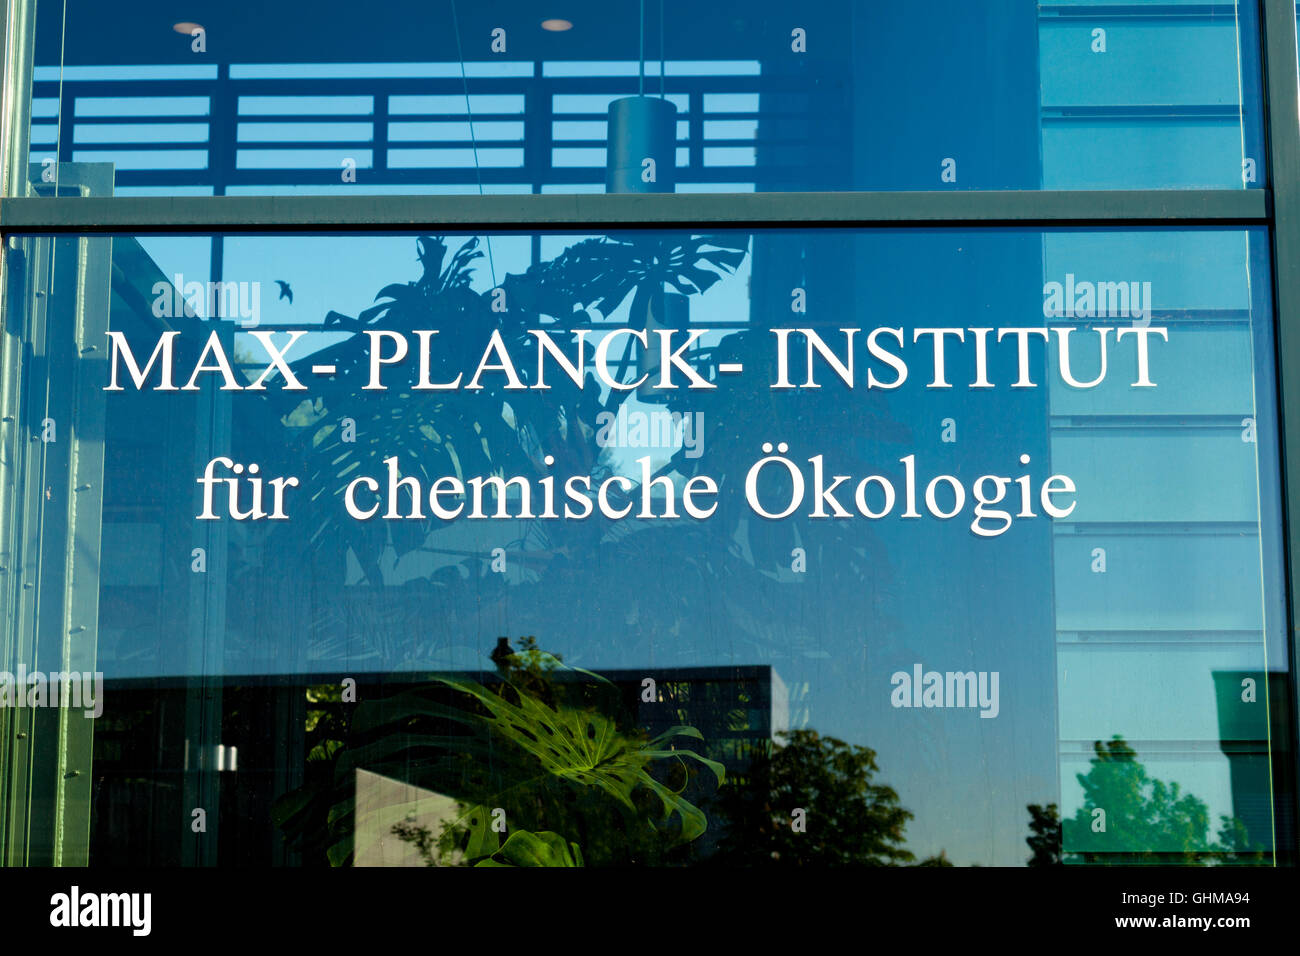 JENA, GERMANY - MAY, 08, 2011: Max Planck Institute for Chemical Ecology is located on Beutenberg Campus[1] in Jena, Germany. It Stock Photo